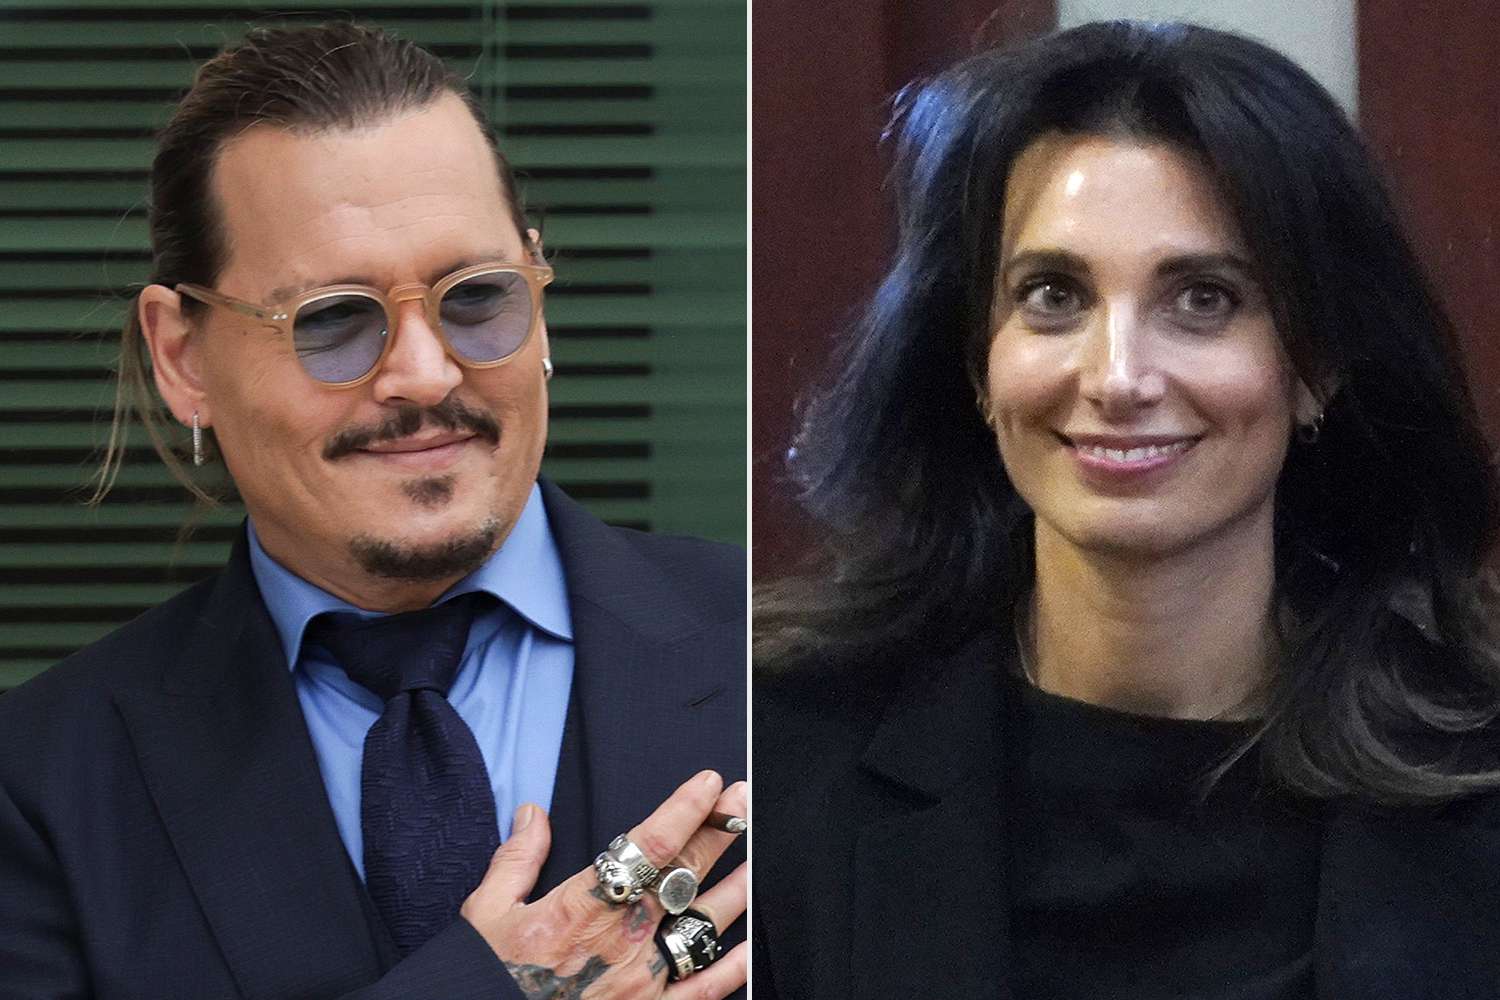 Johnny Depp is reportedly dating an attorney from his U.K. libel lawsuit